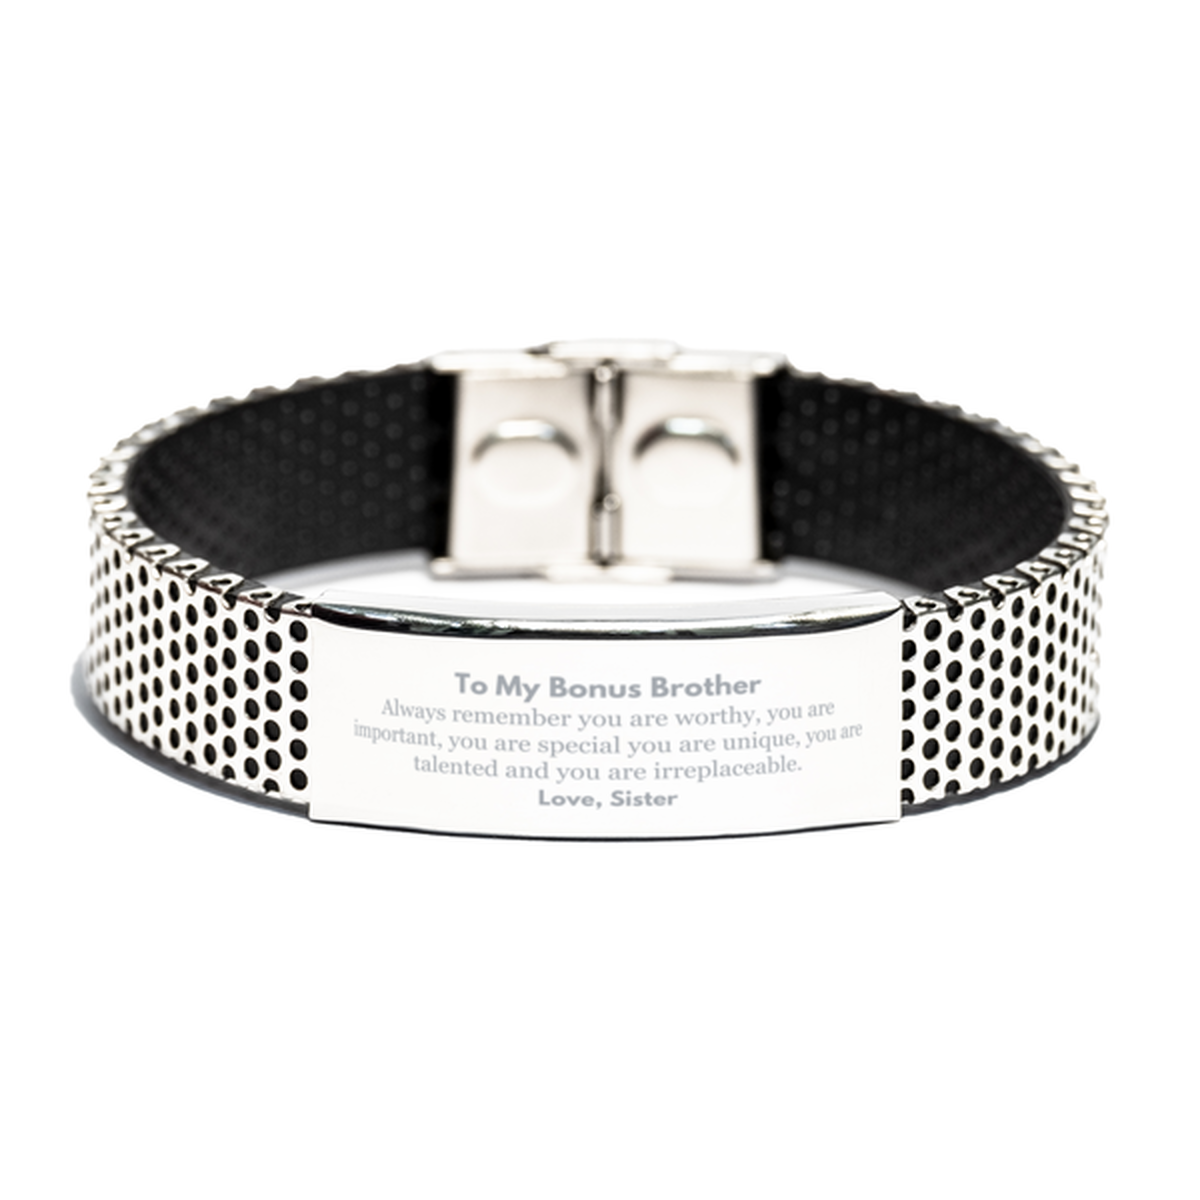 Bonus Brother Birthday Gifts from Sister, Inspirational Stainless Steel Bracelet for Bonus Brother Christmas Graduation Gifts for Bonus Brother Always remember you are worthy, you are important. Love, Sister